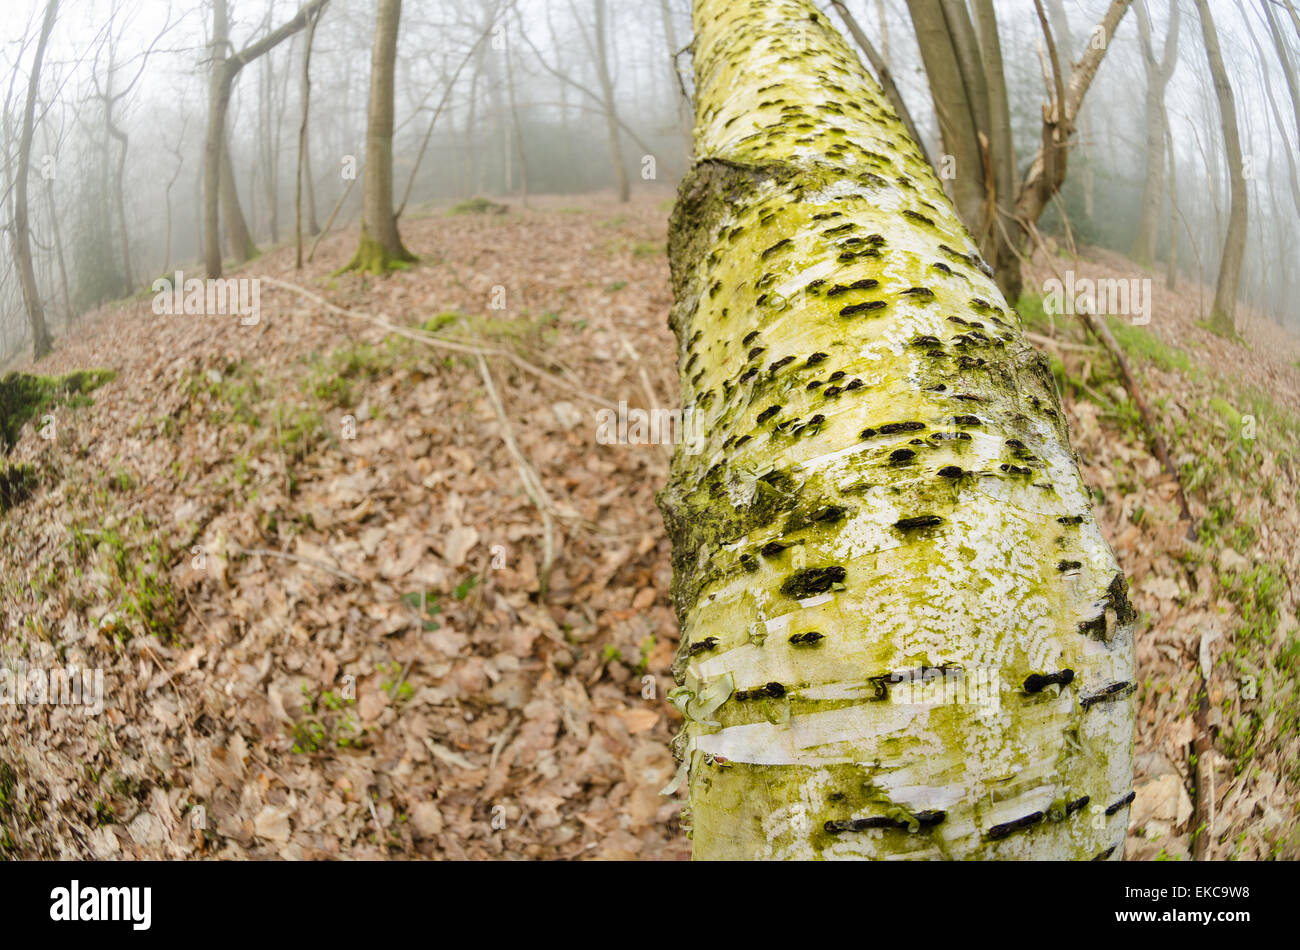 Abstract serrated v patterns made by slug snail rasping off and eating a fine layer of green algae on silver birch bark tree Stock Photo